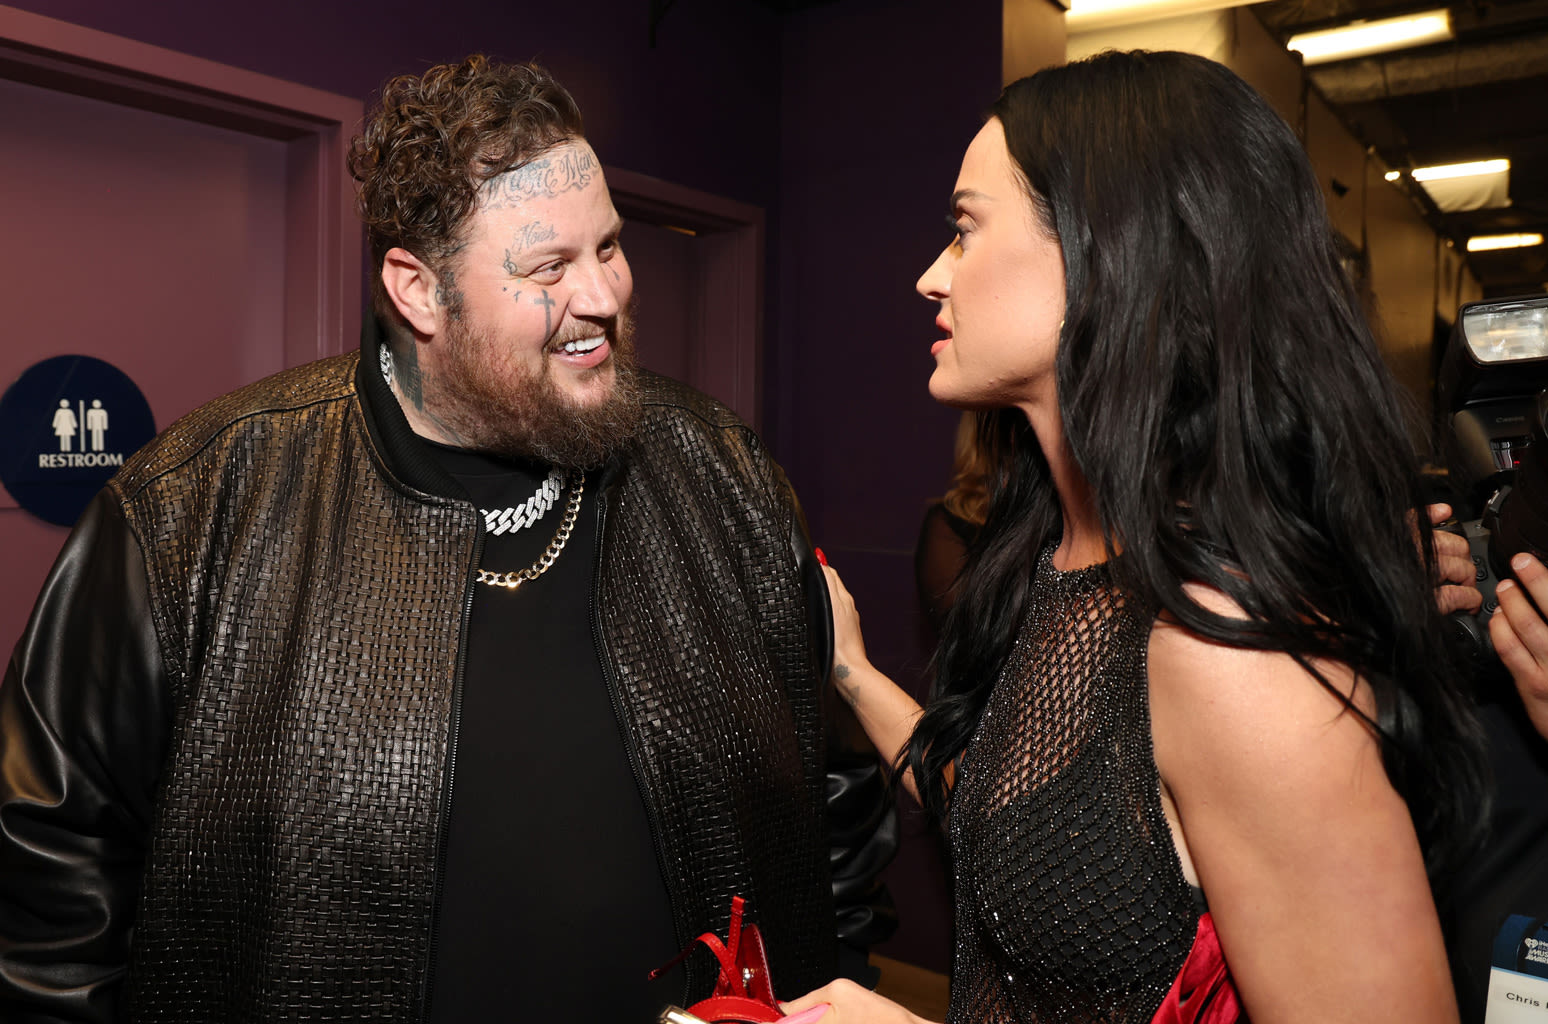 Here’s What Jelly Roll Thinks of Katy Perry Wanting Him to Be a Judge on ‘American Idol’